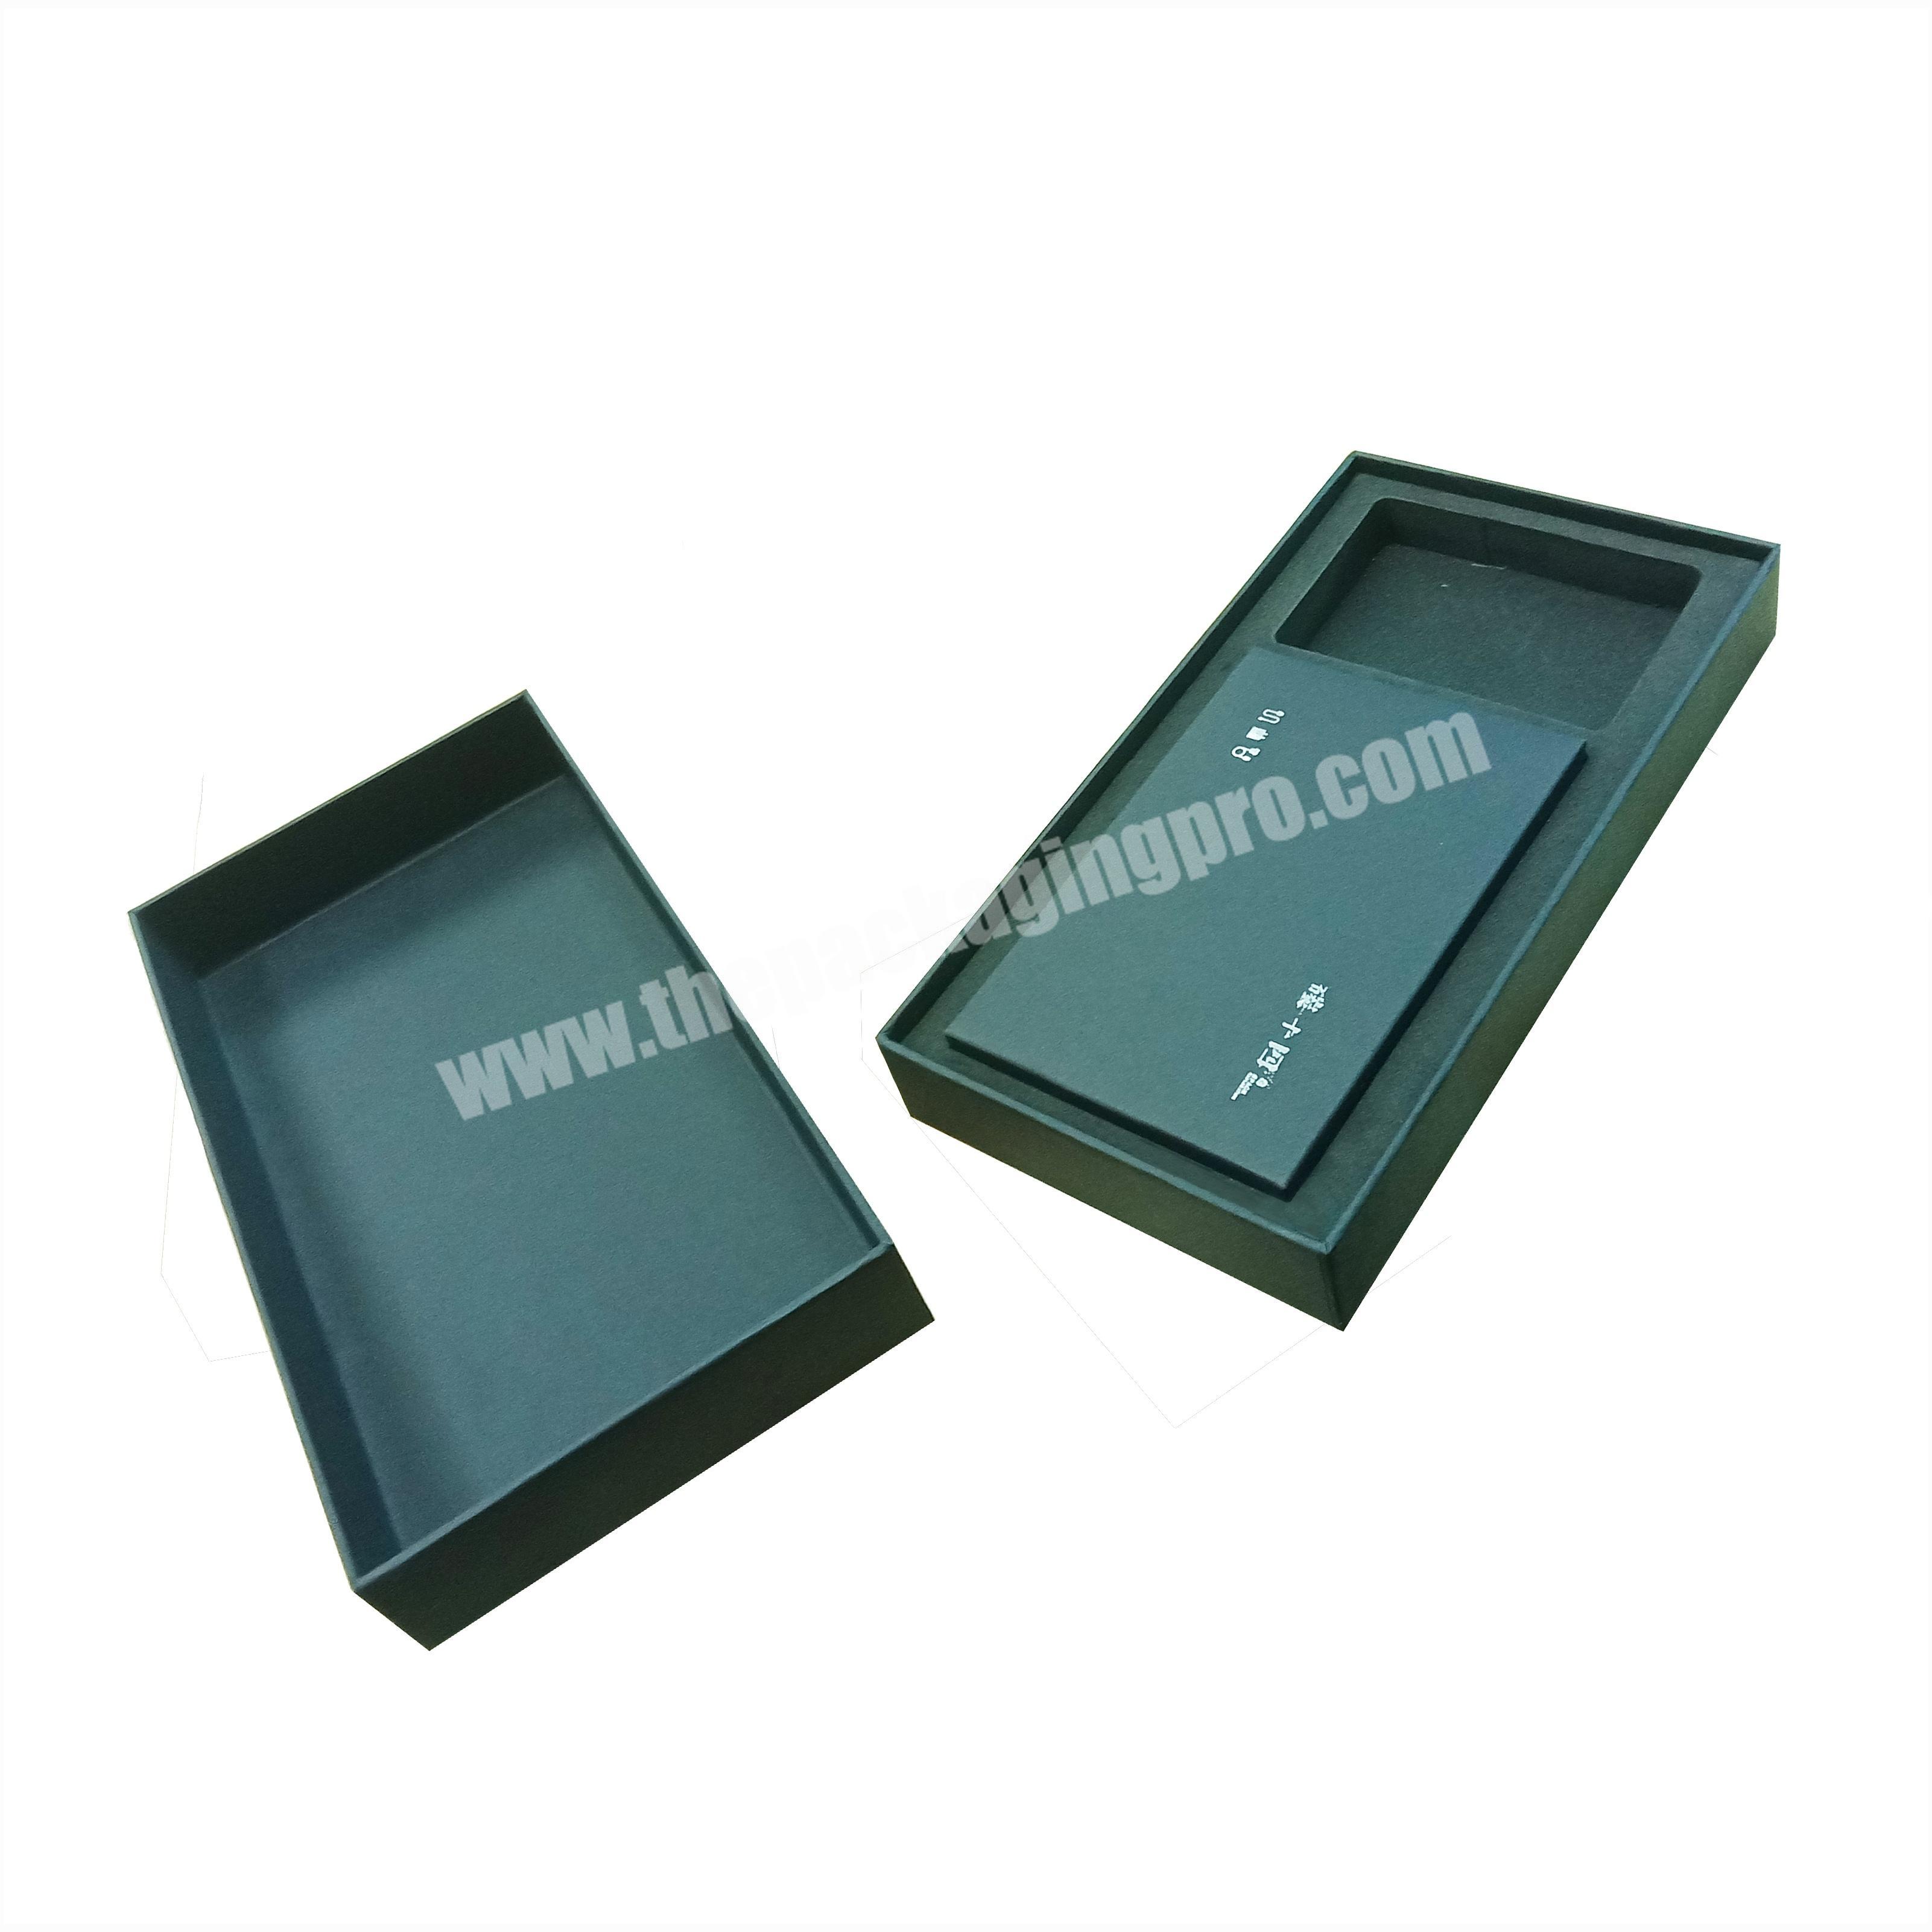 (Electronic Components) phone holder set in gift box hinge flash Made China Low Price